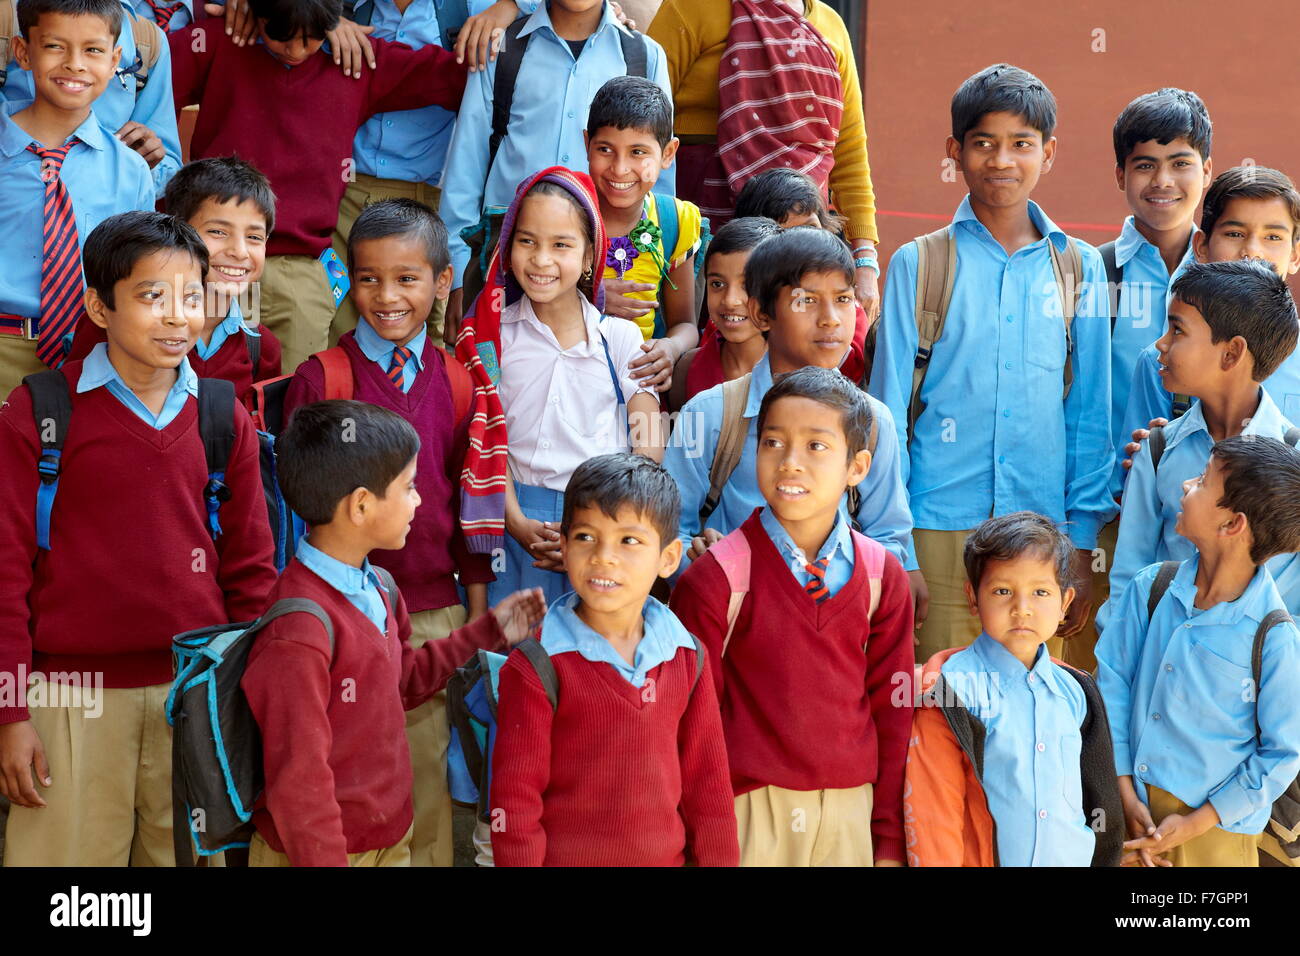 A group of india young children in school, Agra, India Stock Photo